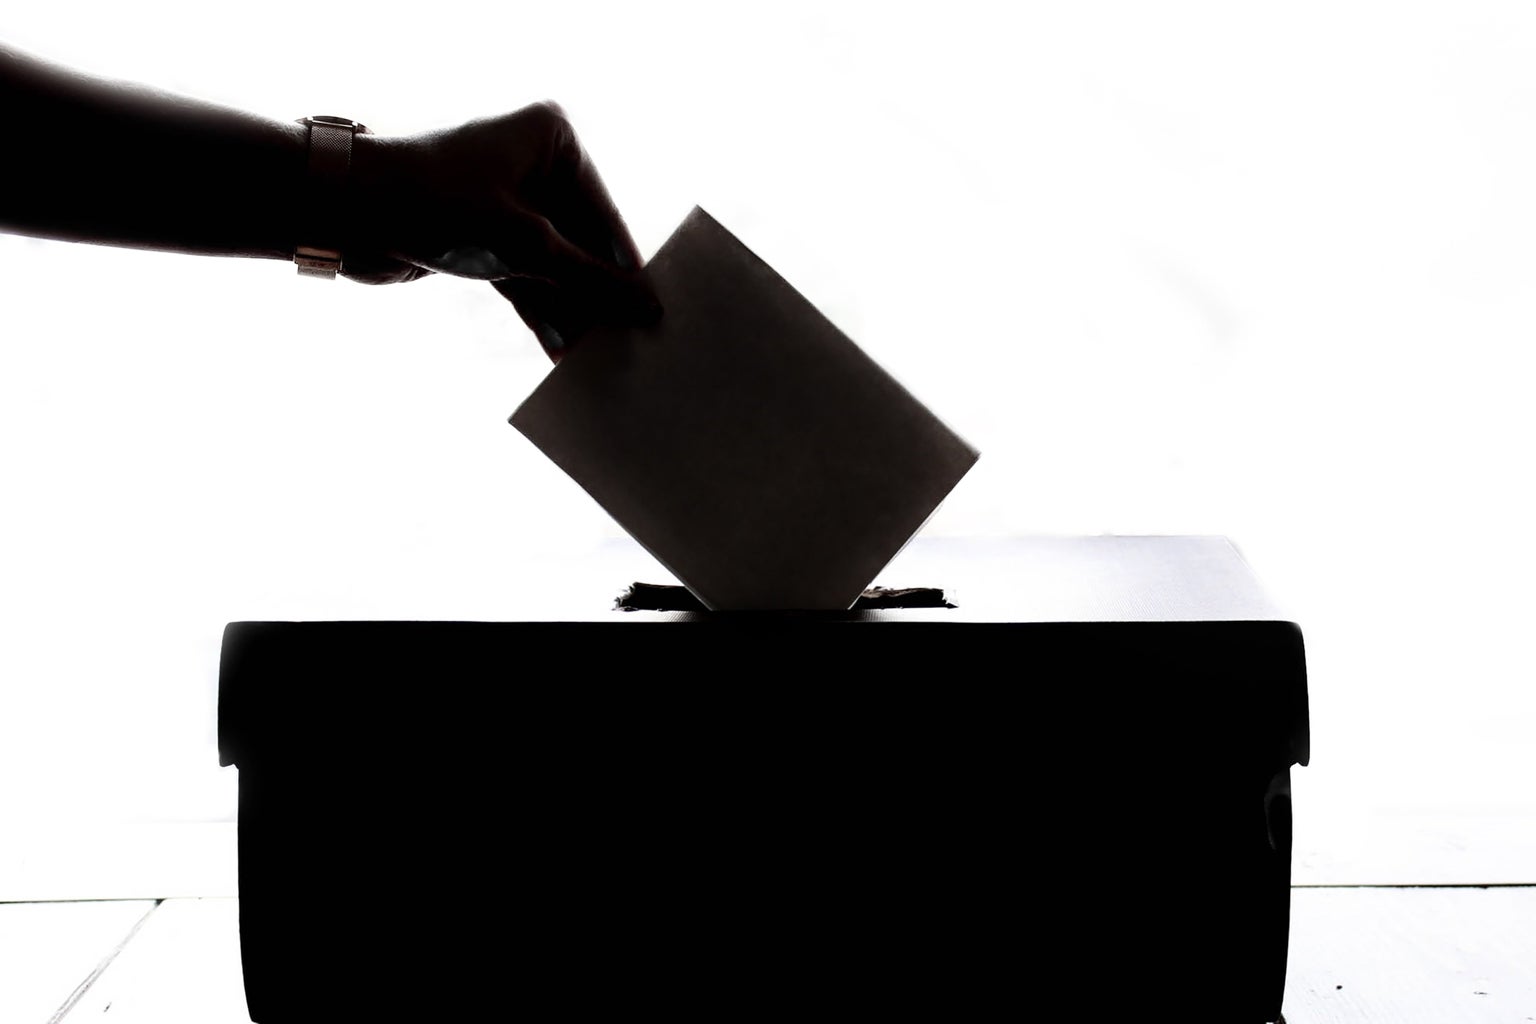 Black and white image of person putting ballot in box